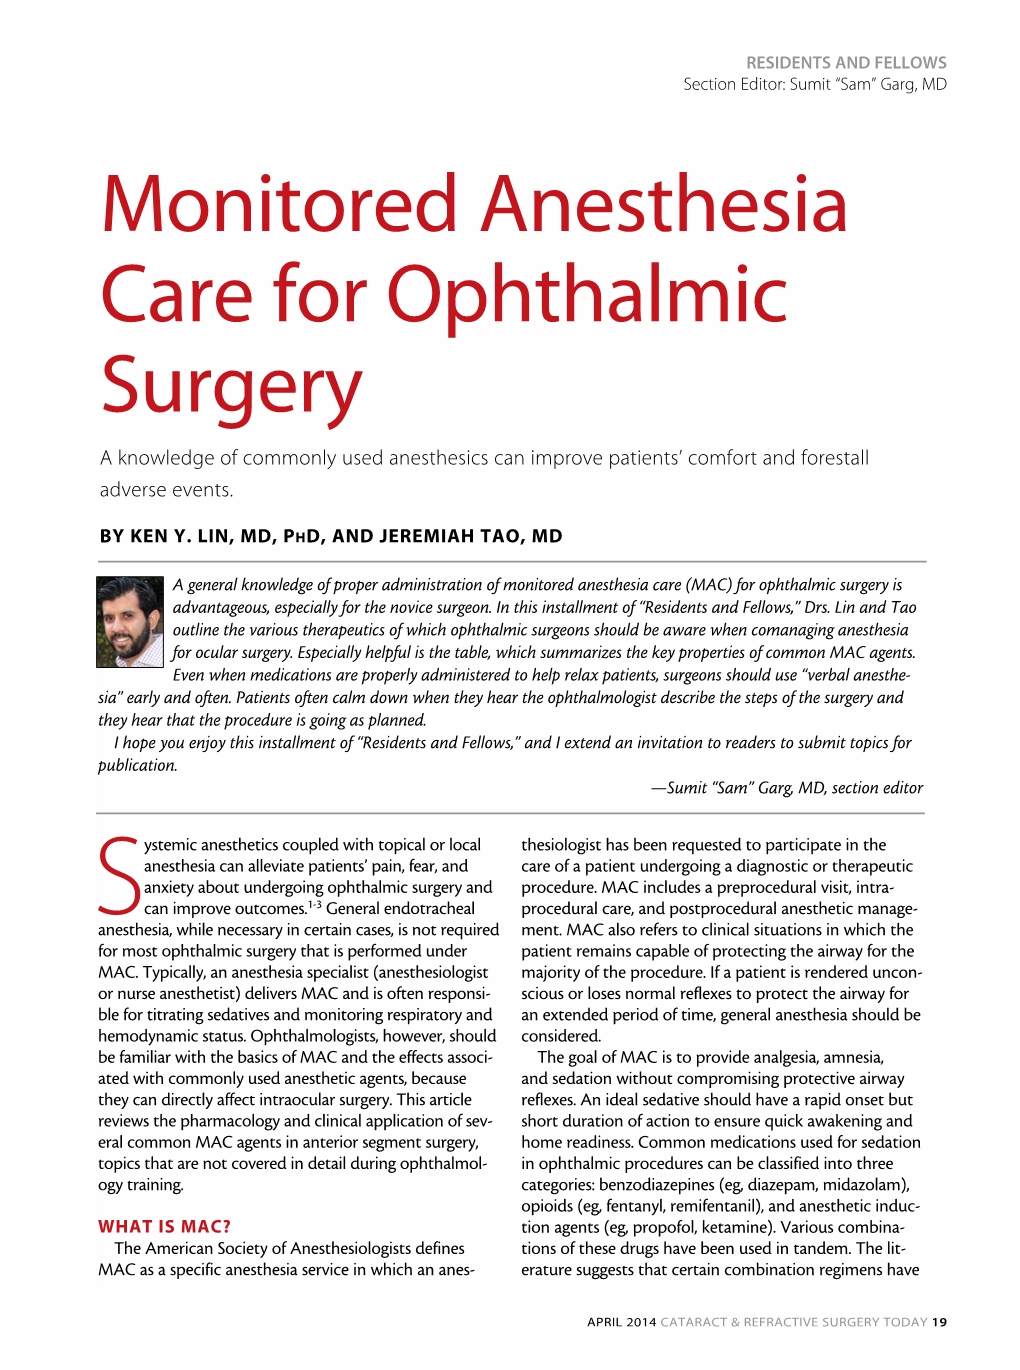 Monitored Anesthesia Care for Ophthalmic Surgery a Knowledge of Commonly Used Anesthesics Can Improve Patients’ Comfort and Forestall Adverse Events